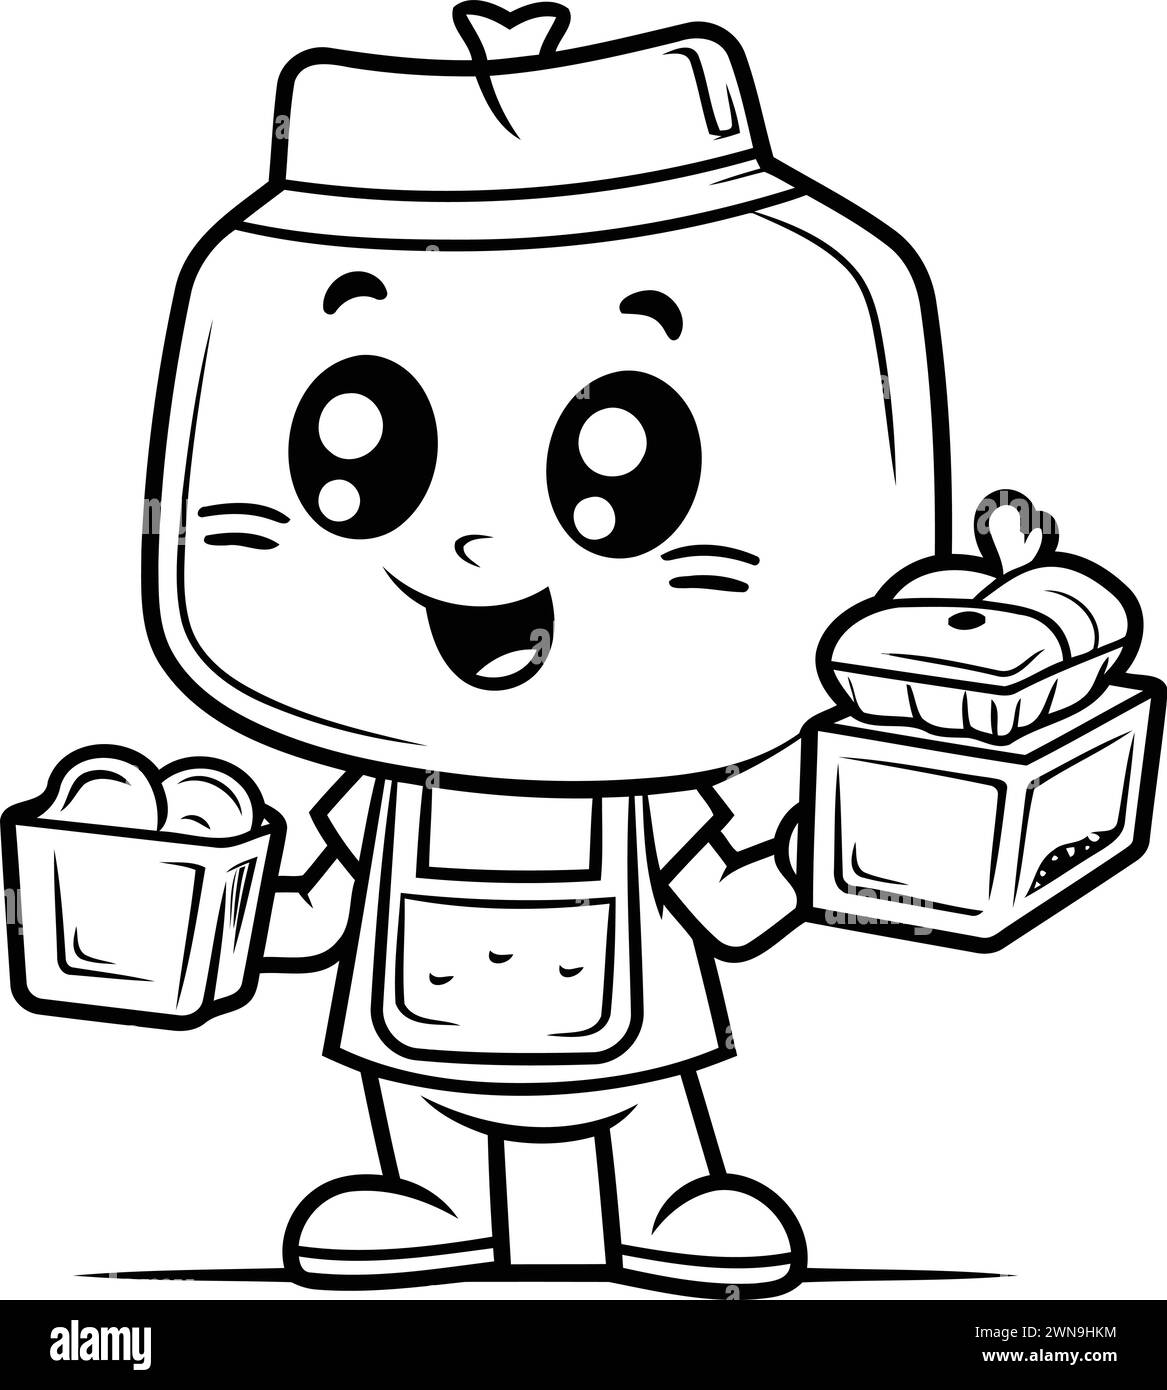 Black And White Cartoon Illustration of Cute Smiling Mascot Farmer Character with Food Boxes Stock Vector